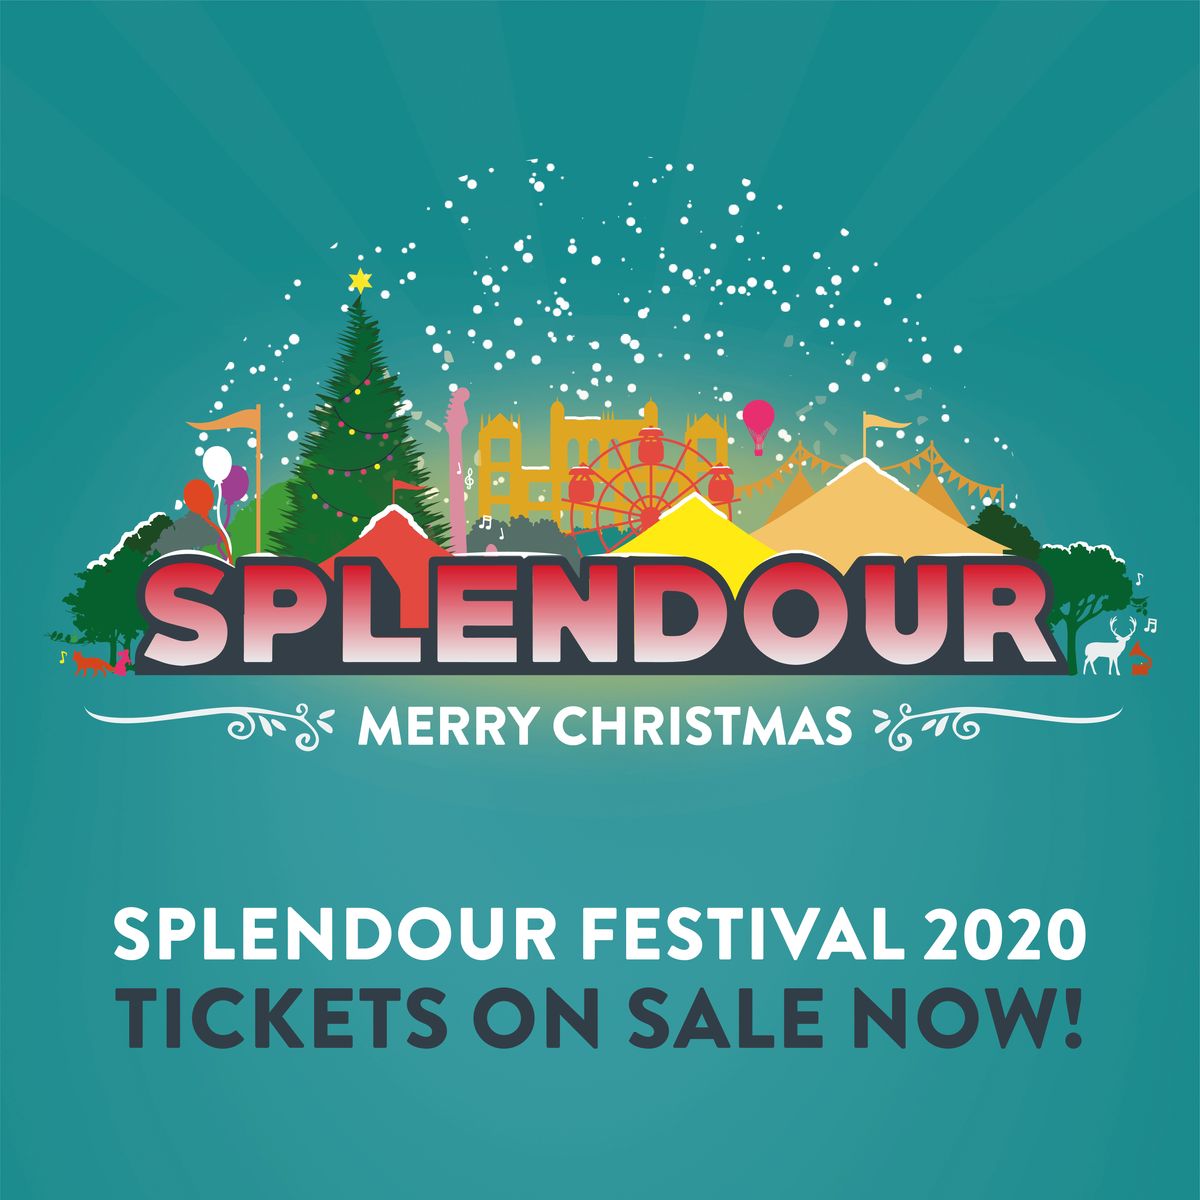  Tickets for Splendour Festival are now on sale